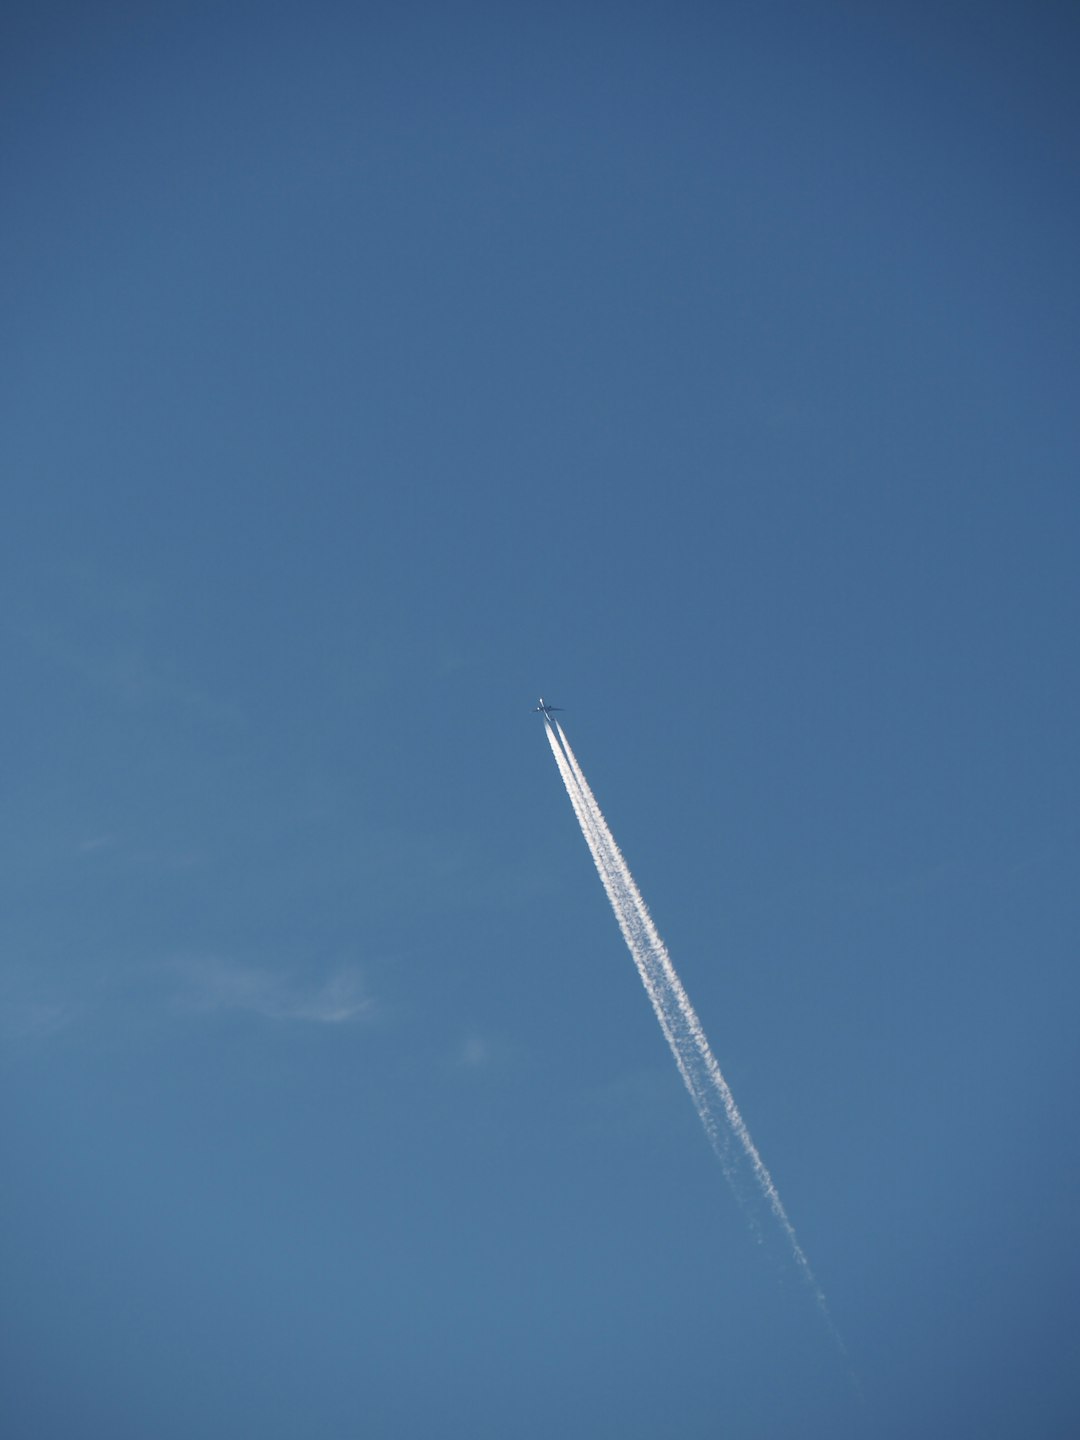 white plane in the sky during daytime